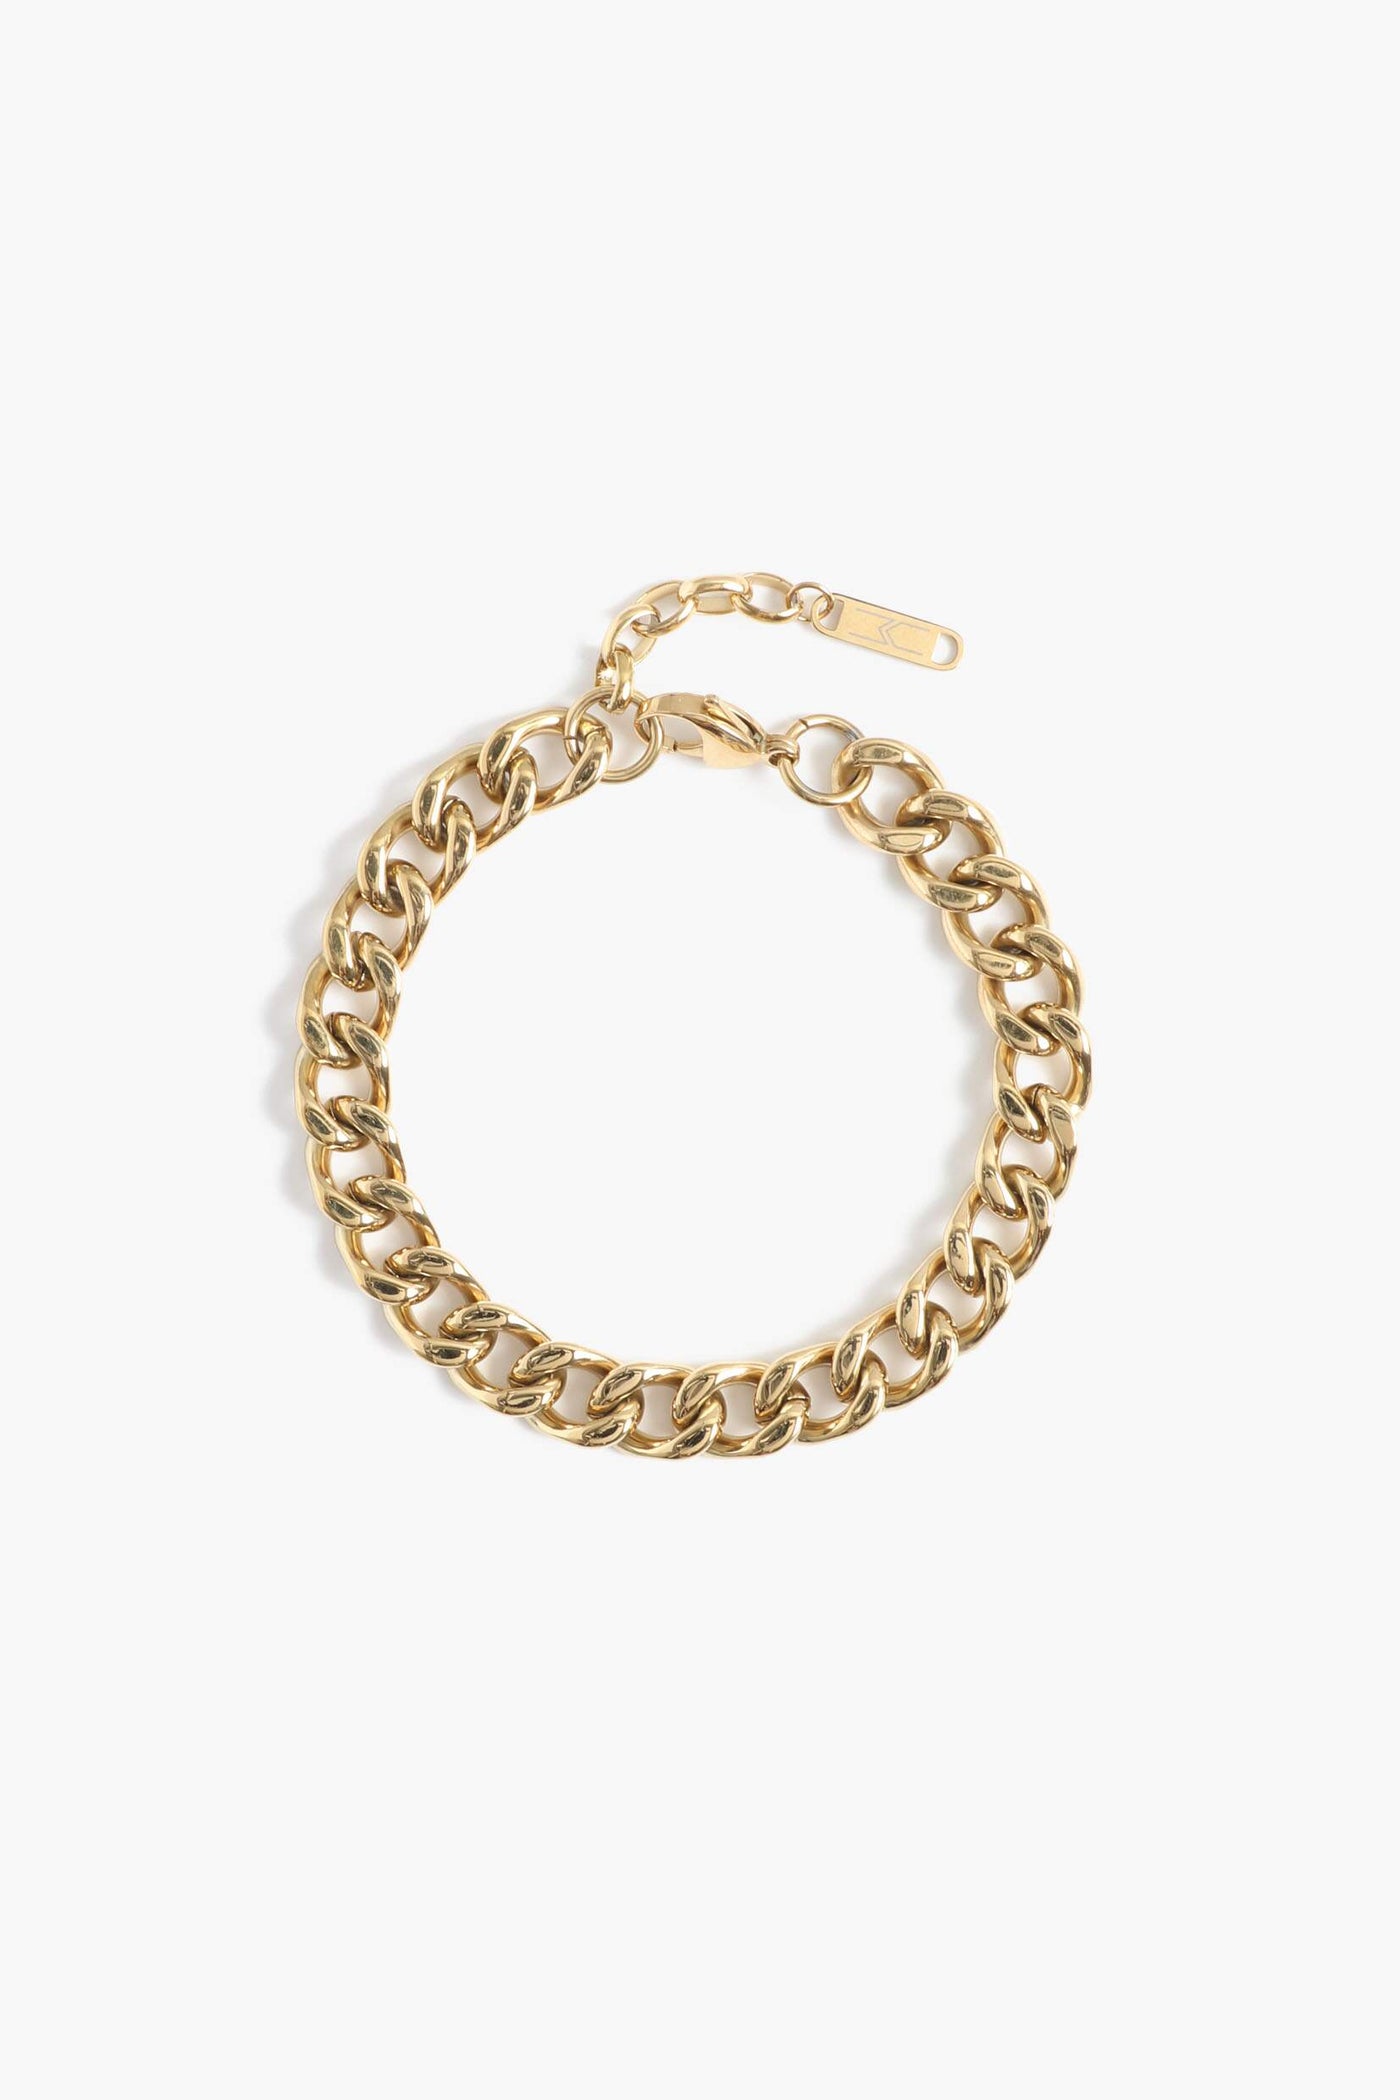 Marrin Costello Jewelry Queens Cuban Link chain anklet with lobster clasp closure. Waterproof, sustainable, hypoallergenic. 14k gold plated stainless steel.